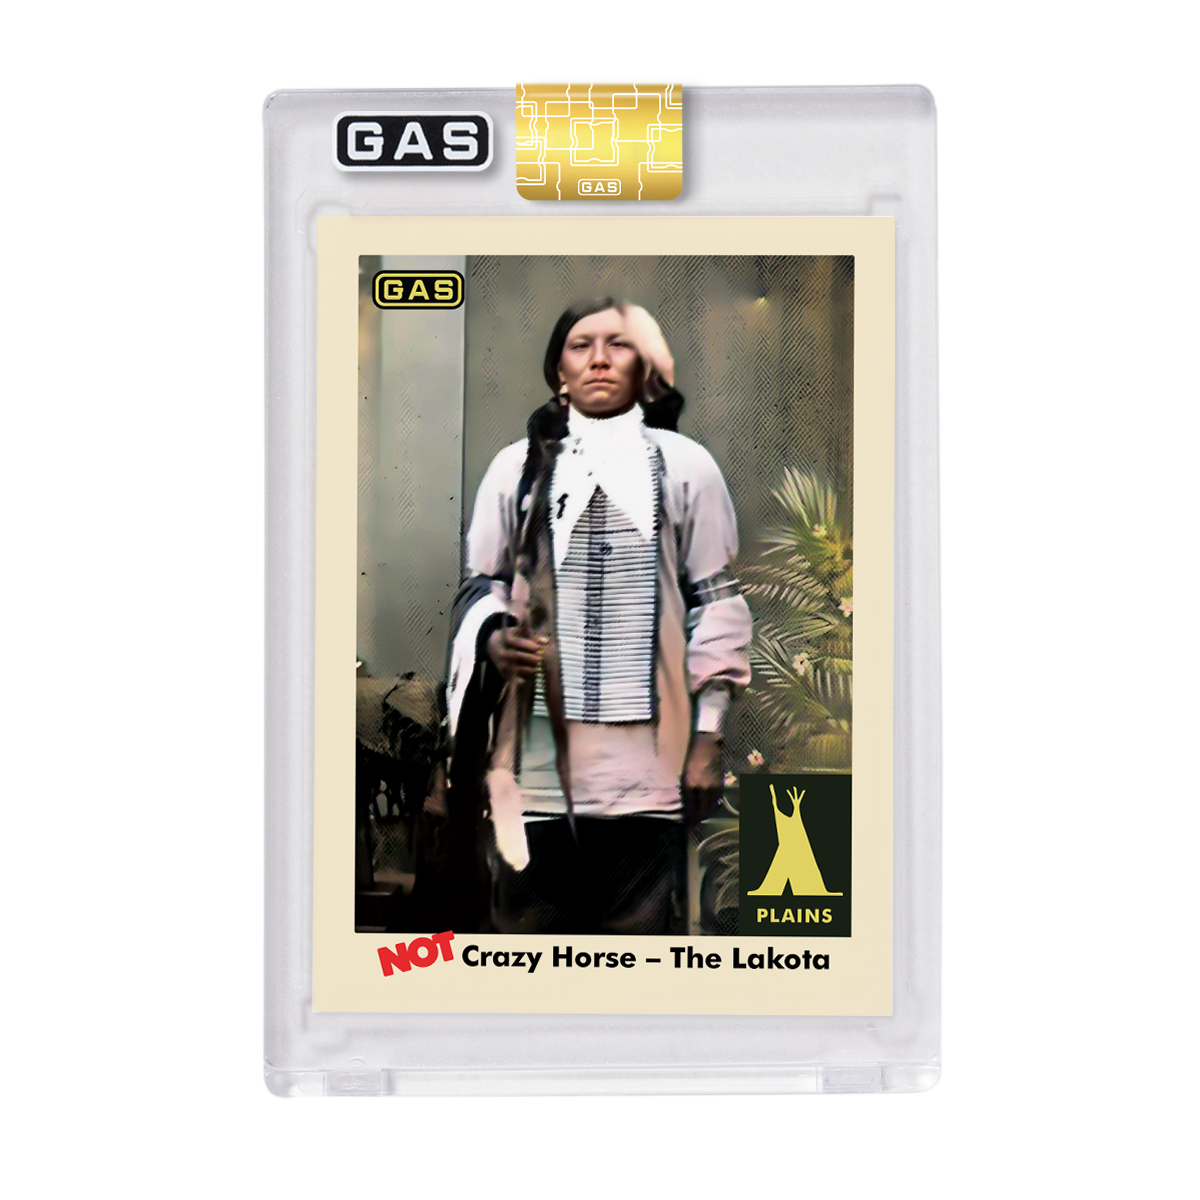 GAS Series 3 #25 NOT Crazy Horse Short Print Trading Card #’d to 20